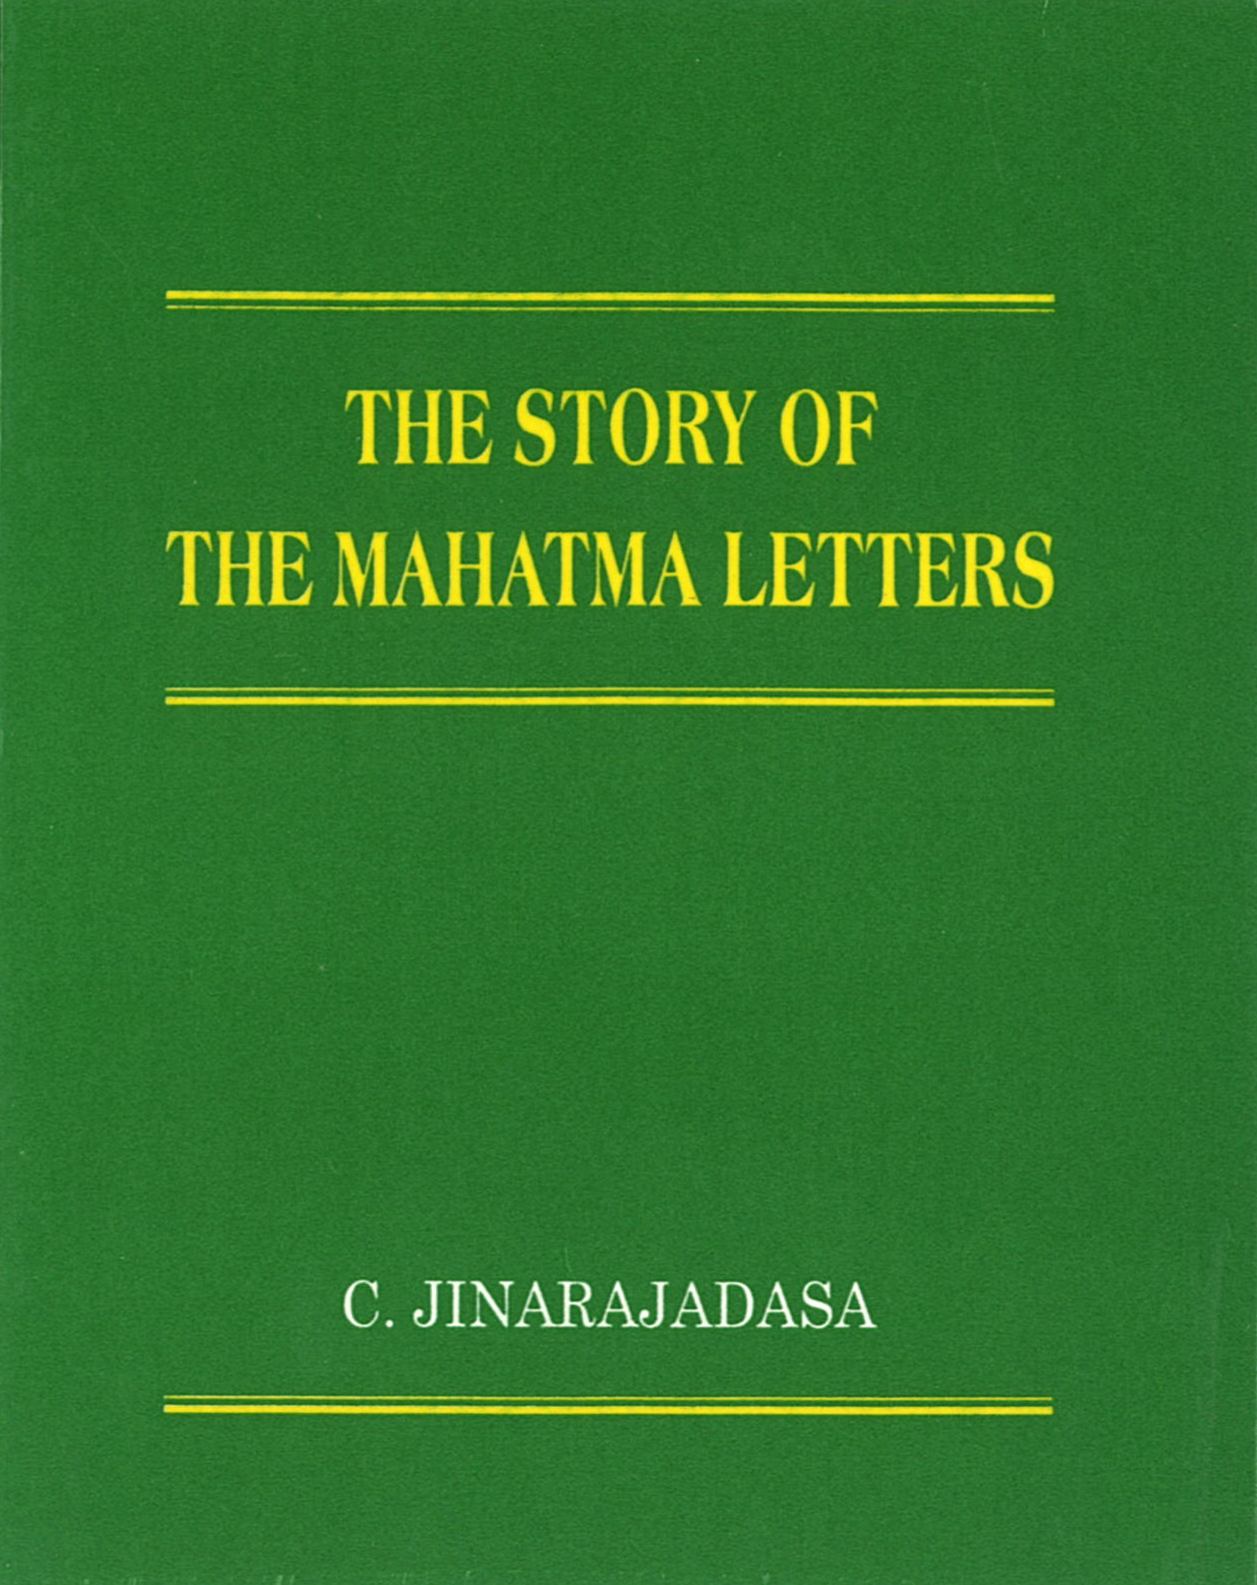 The Story of the Mahatma Letters